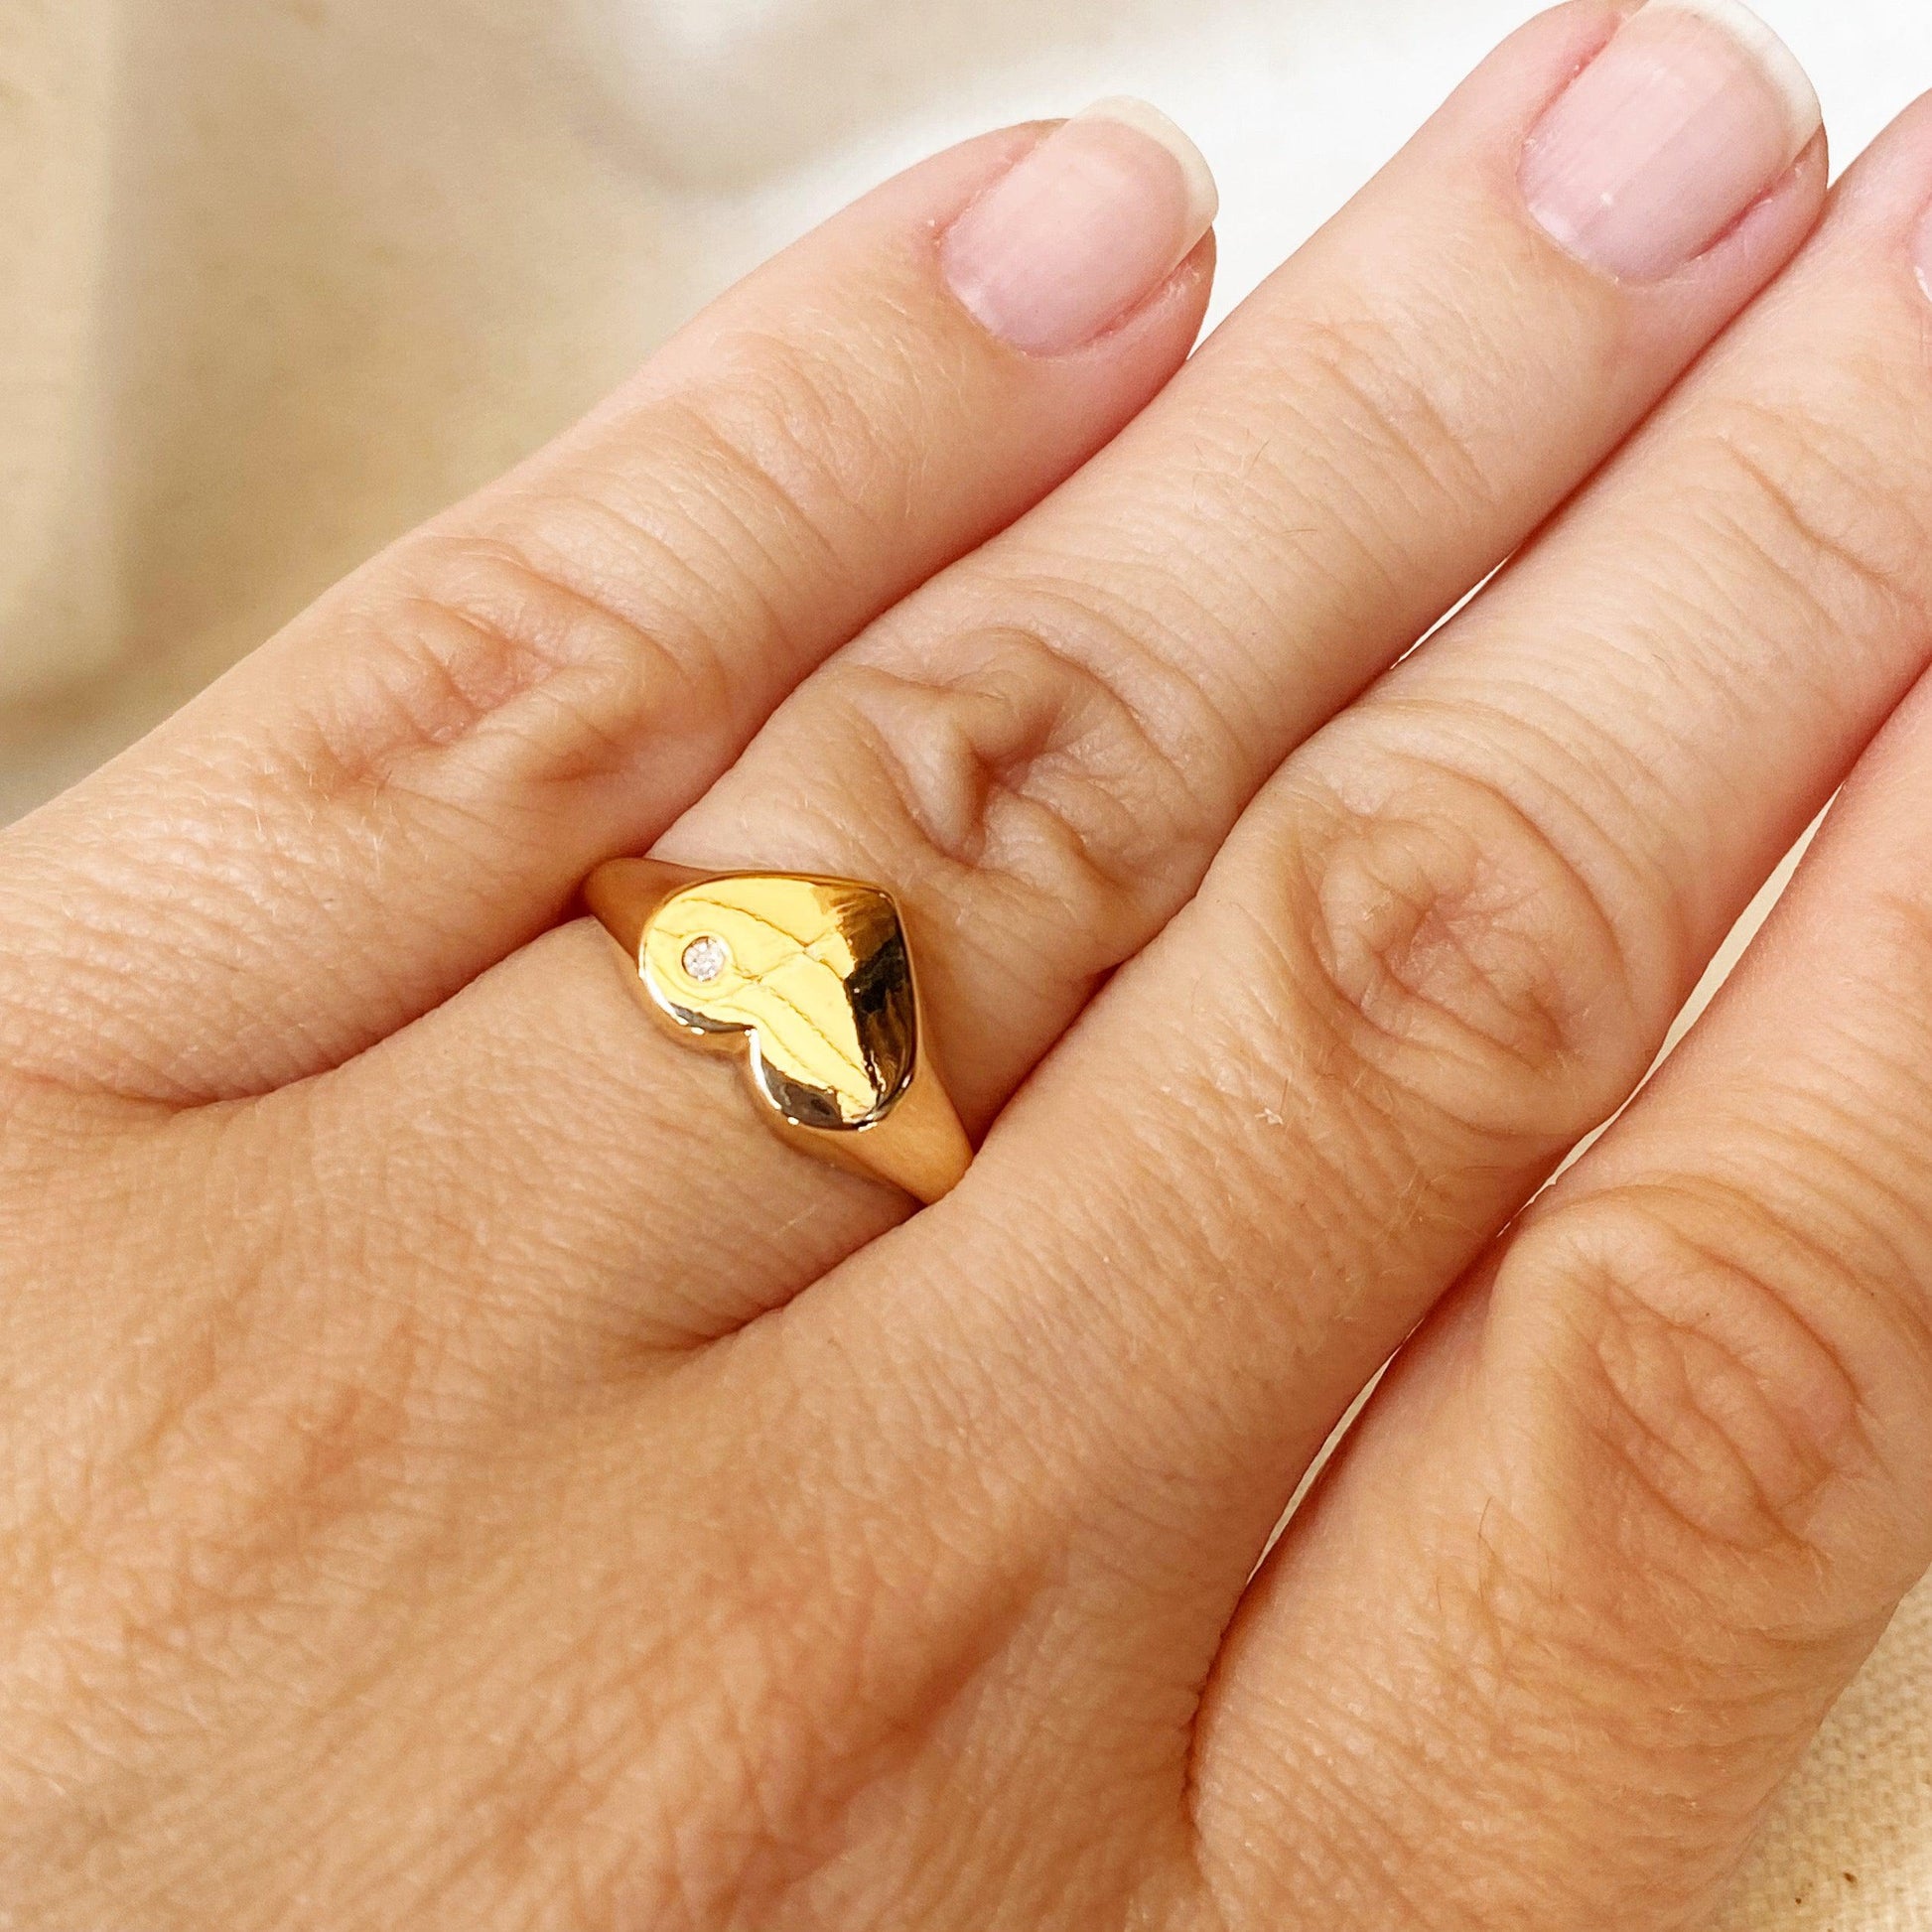 GoldFi 18k Gold Filled Heart Plate Top Ring